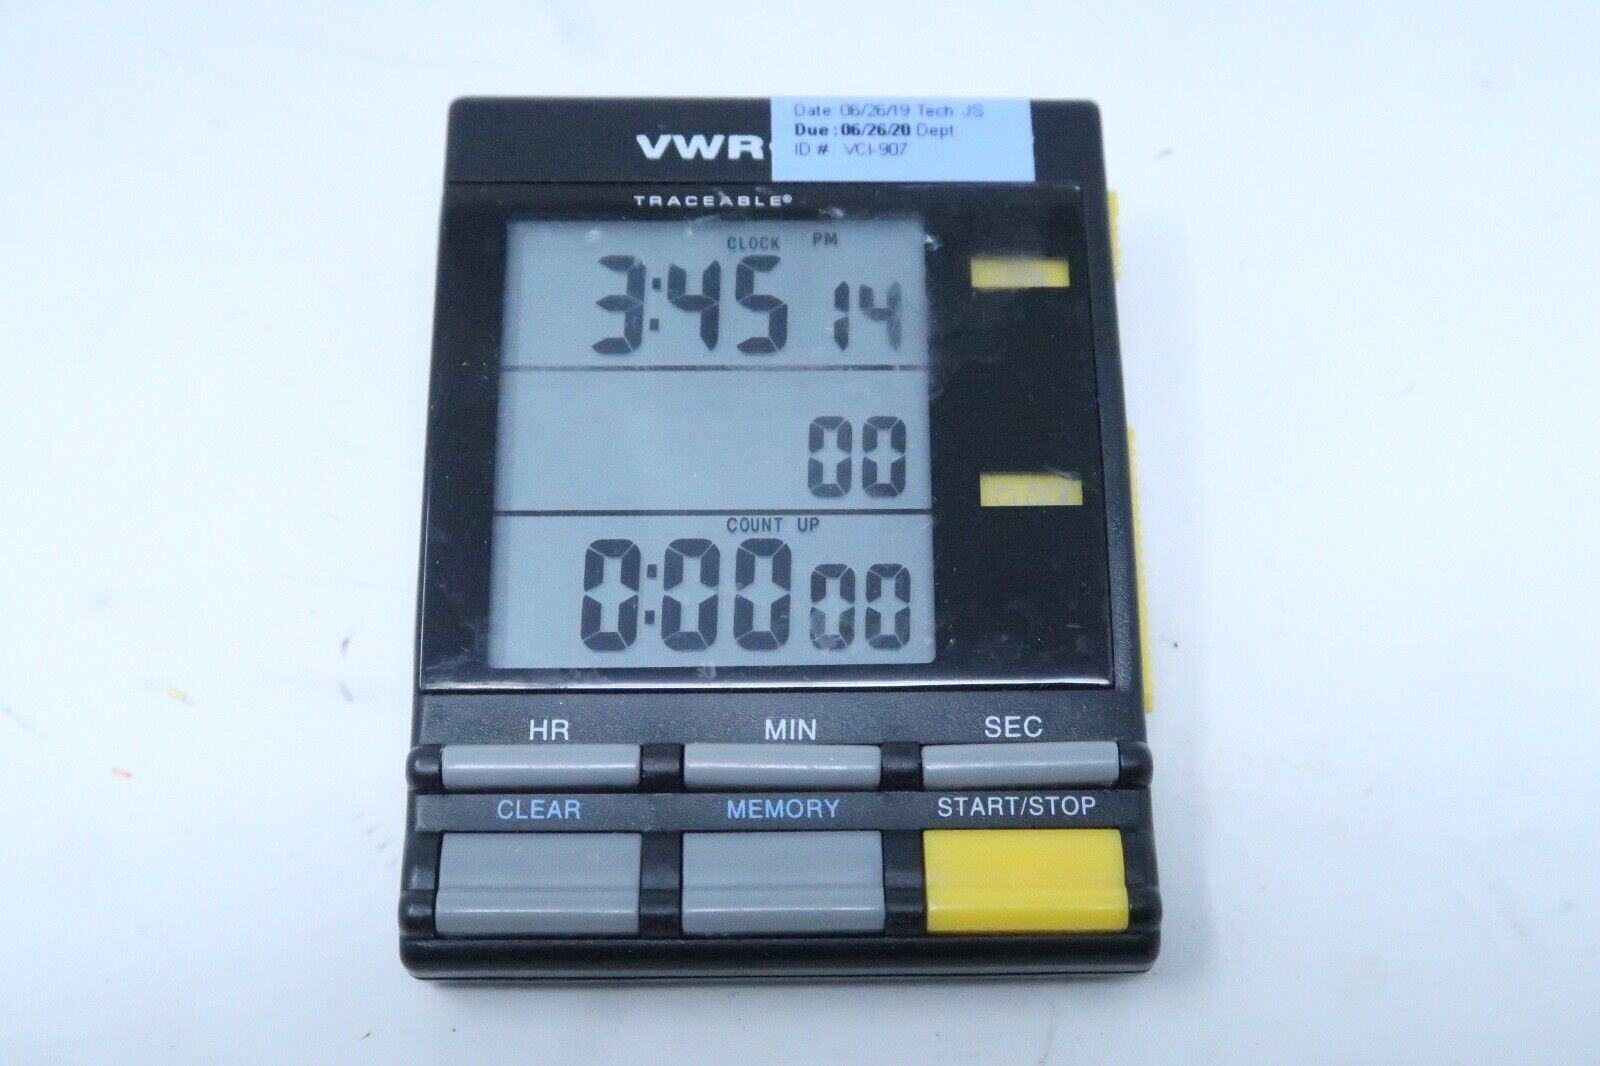 VWR #62344-588 Traceable calibration stopwatch & timer, Laboratory Wall Clock